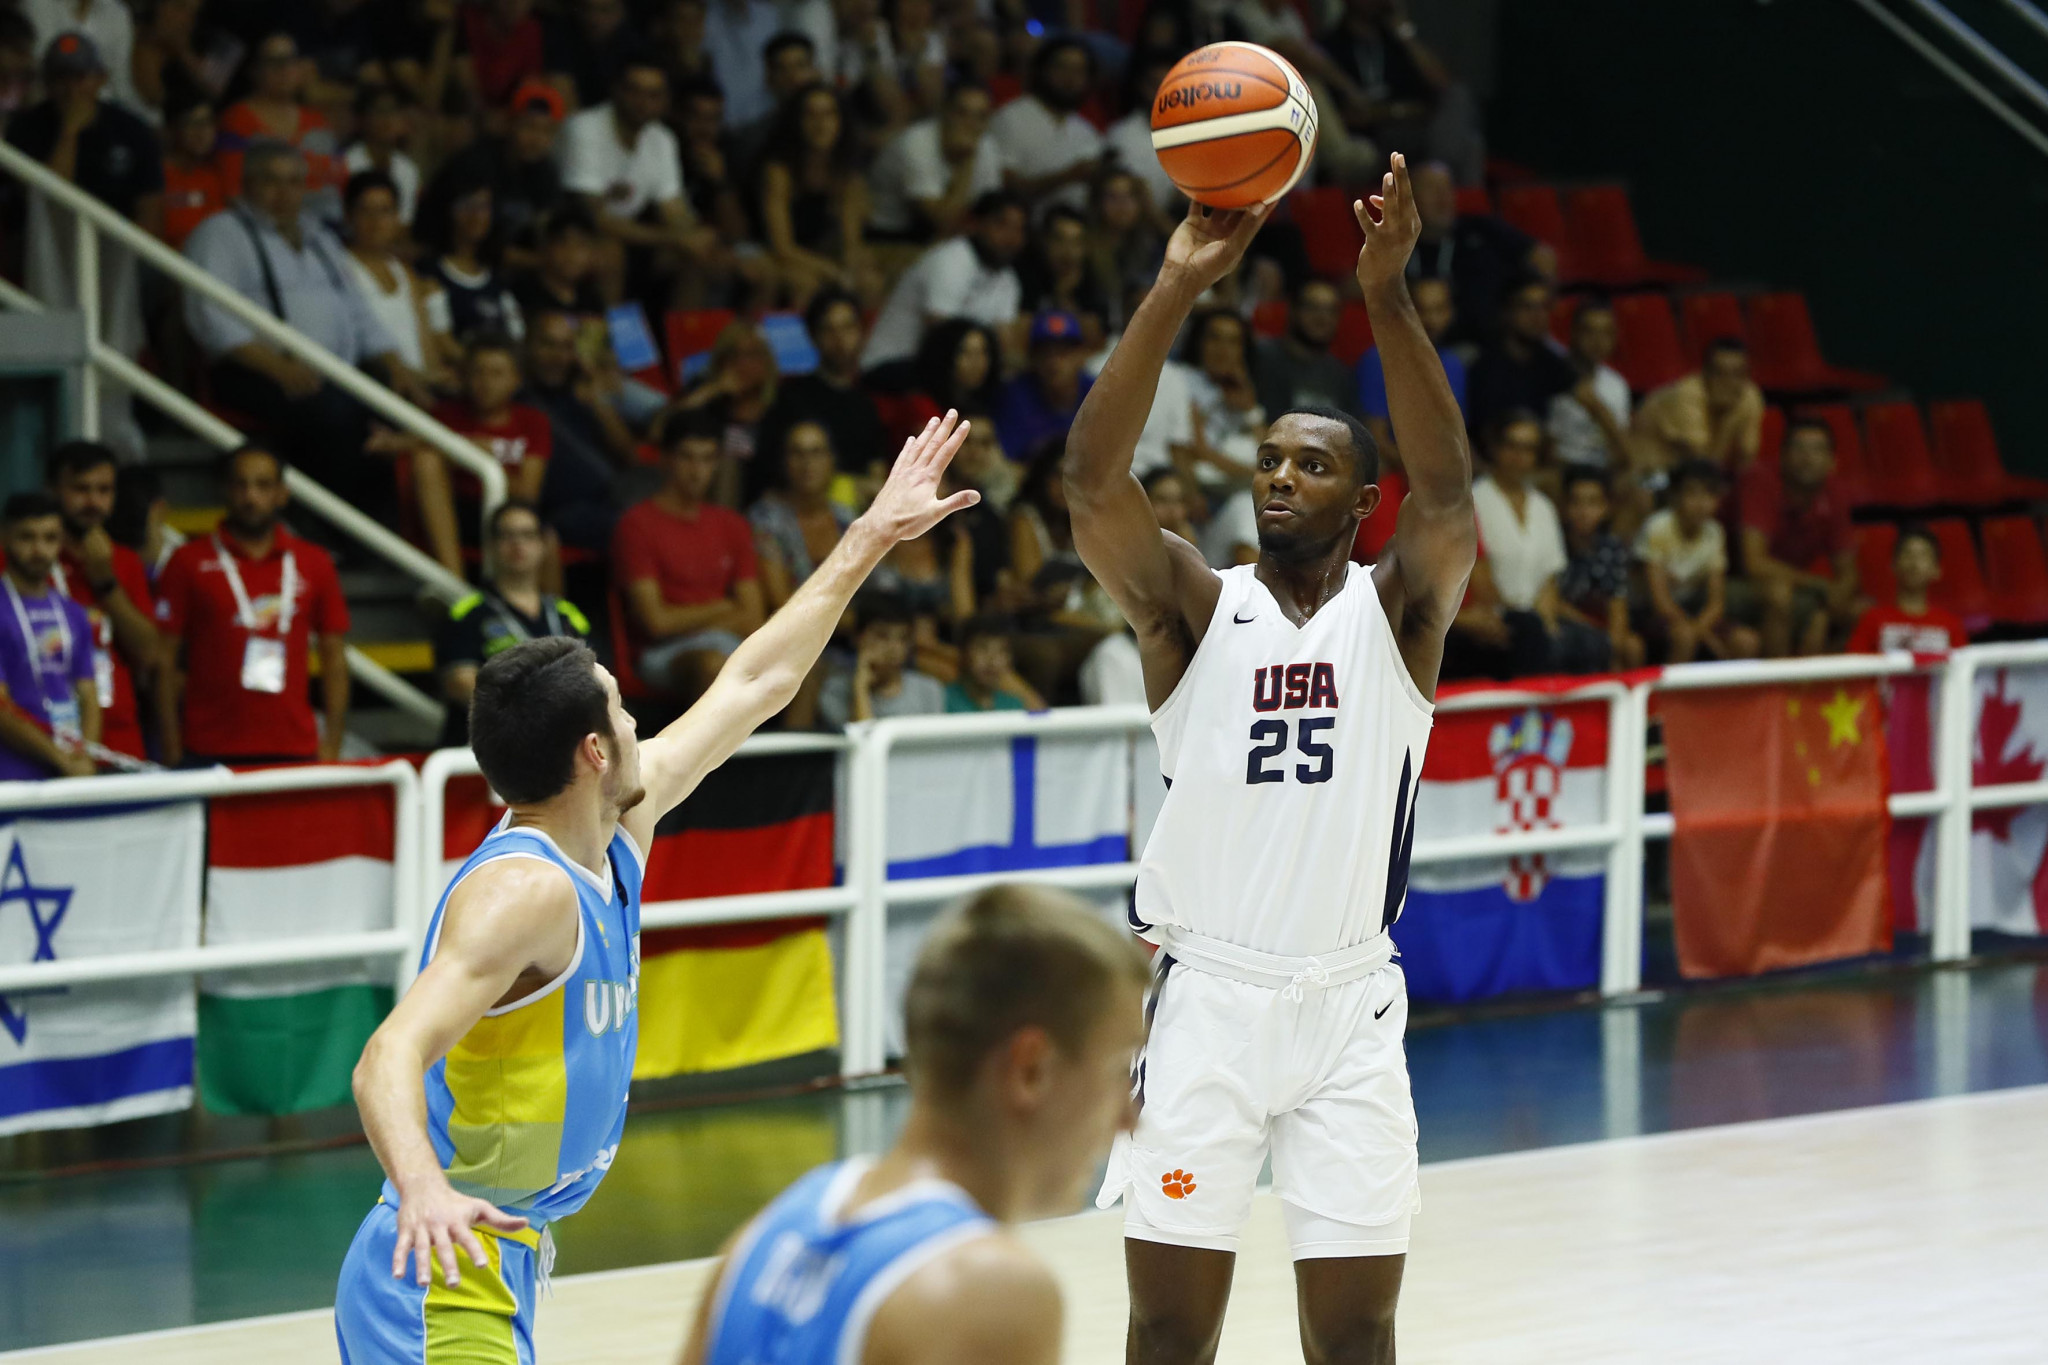 The United States took on Ukraine in the men's basketball gold medal match ©Naples 2019